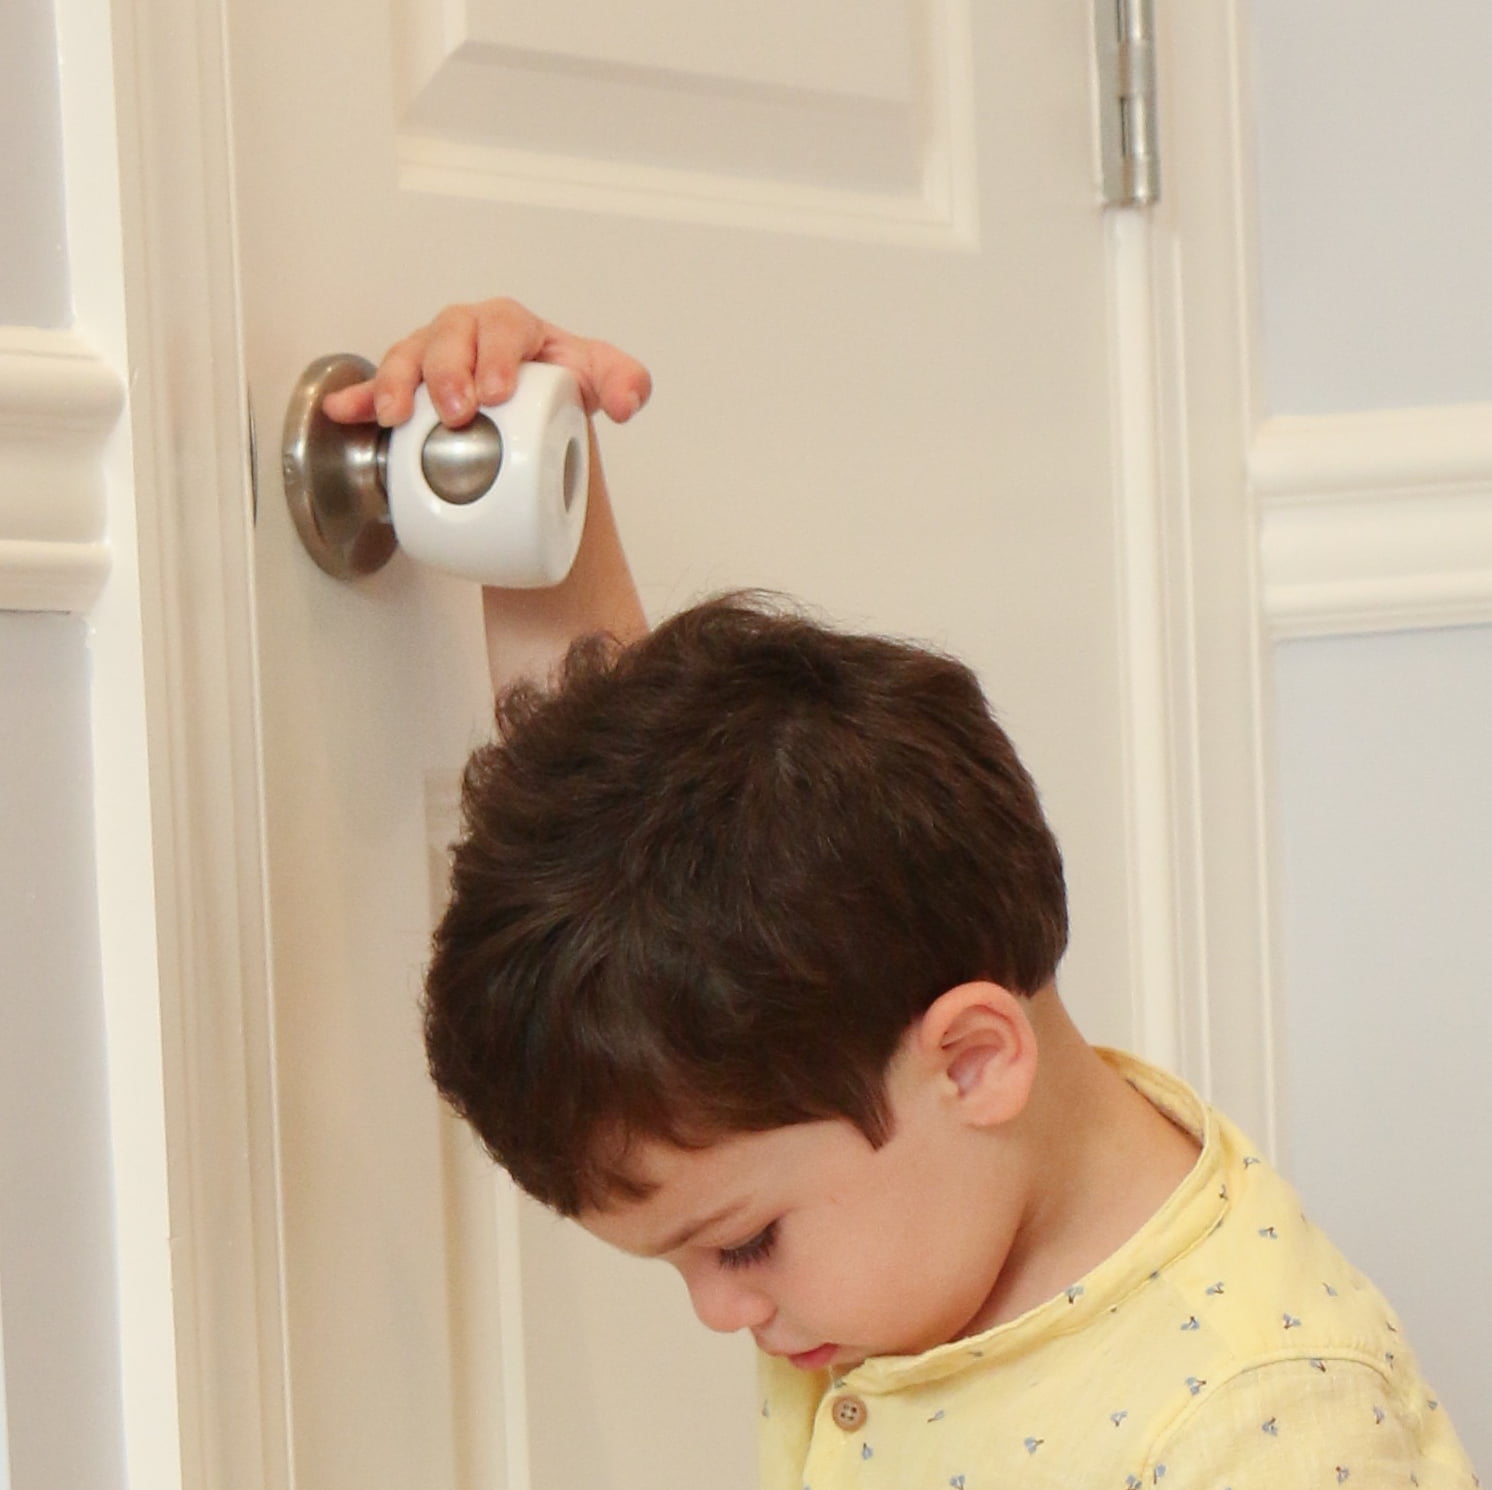 Child Proof Doors Child Safety Cover 8 Pack Door Knob Covers 4 Pack 